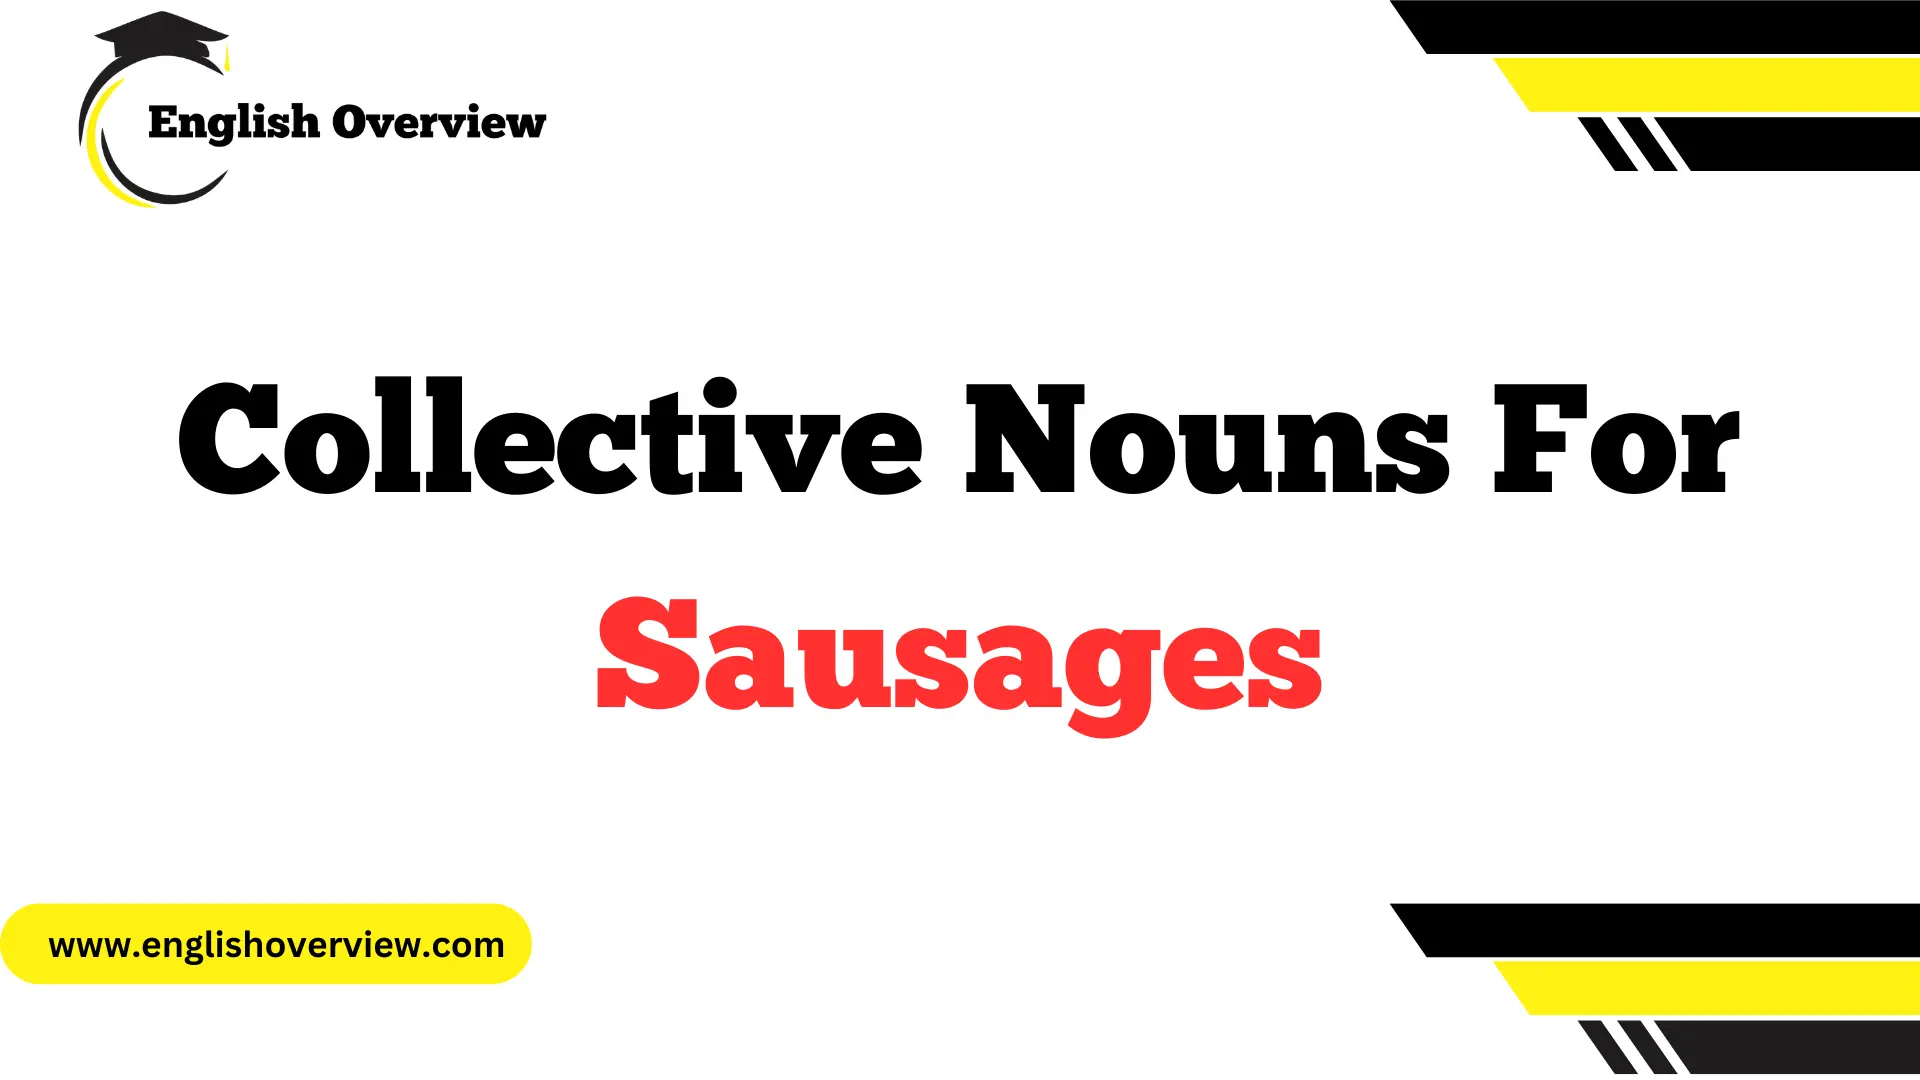 Collective Nouns For Sausages